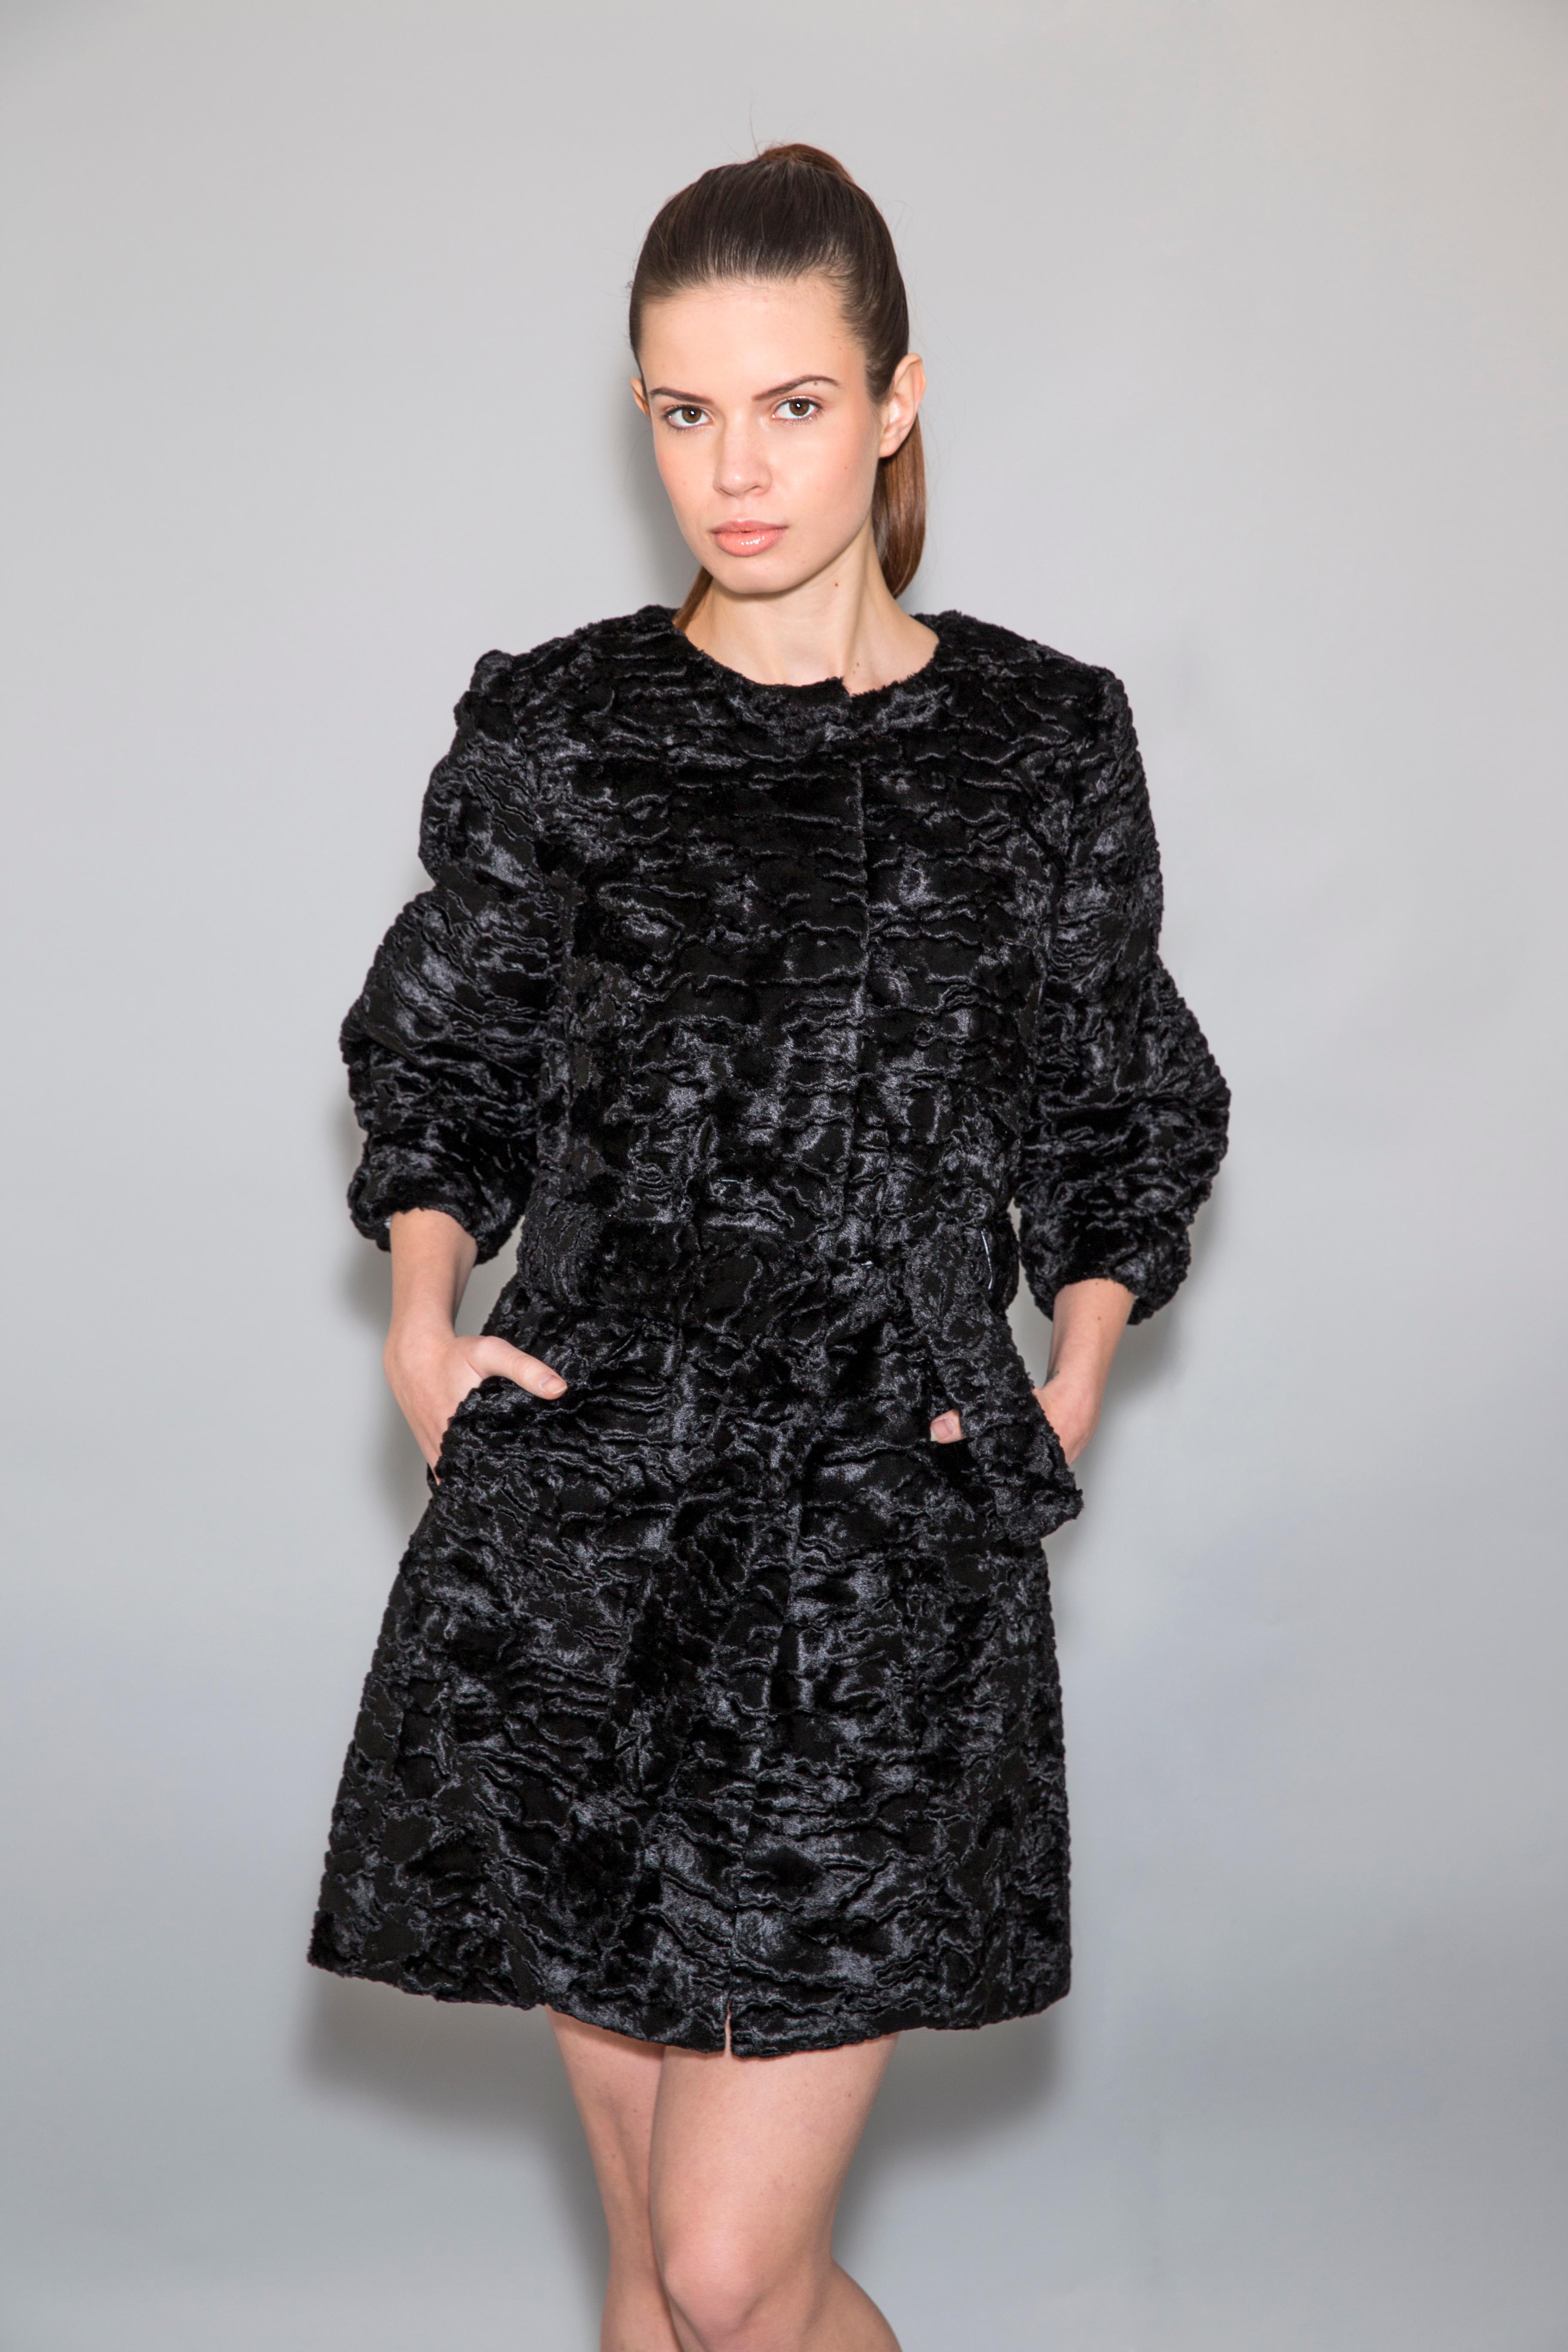 The Matilde black Astrakhan faux fur coat with belt is a one of a kind exclusive piece. Featuring the highest quality custom man made pelage, this velvety fur free coat is a stunning replica of the Astrakhan broadtail fur. Elegant, stylish and